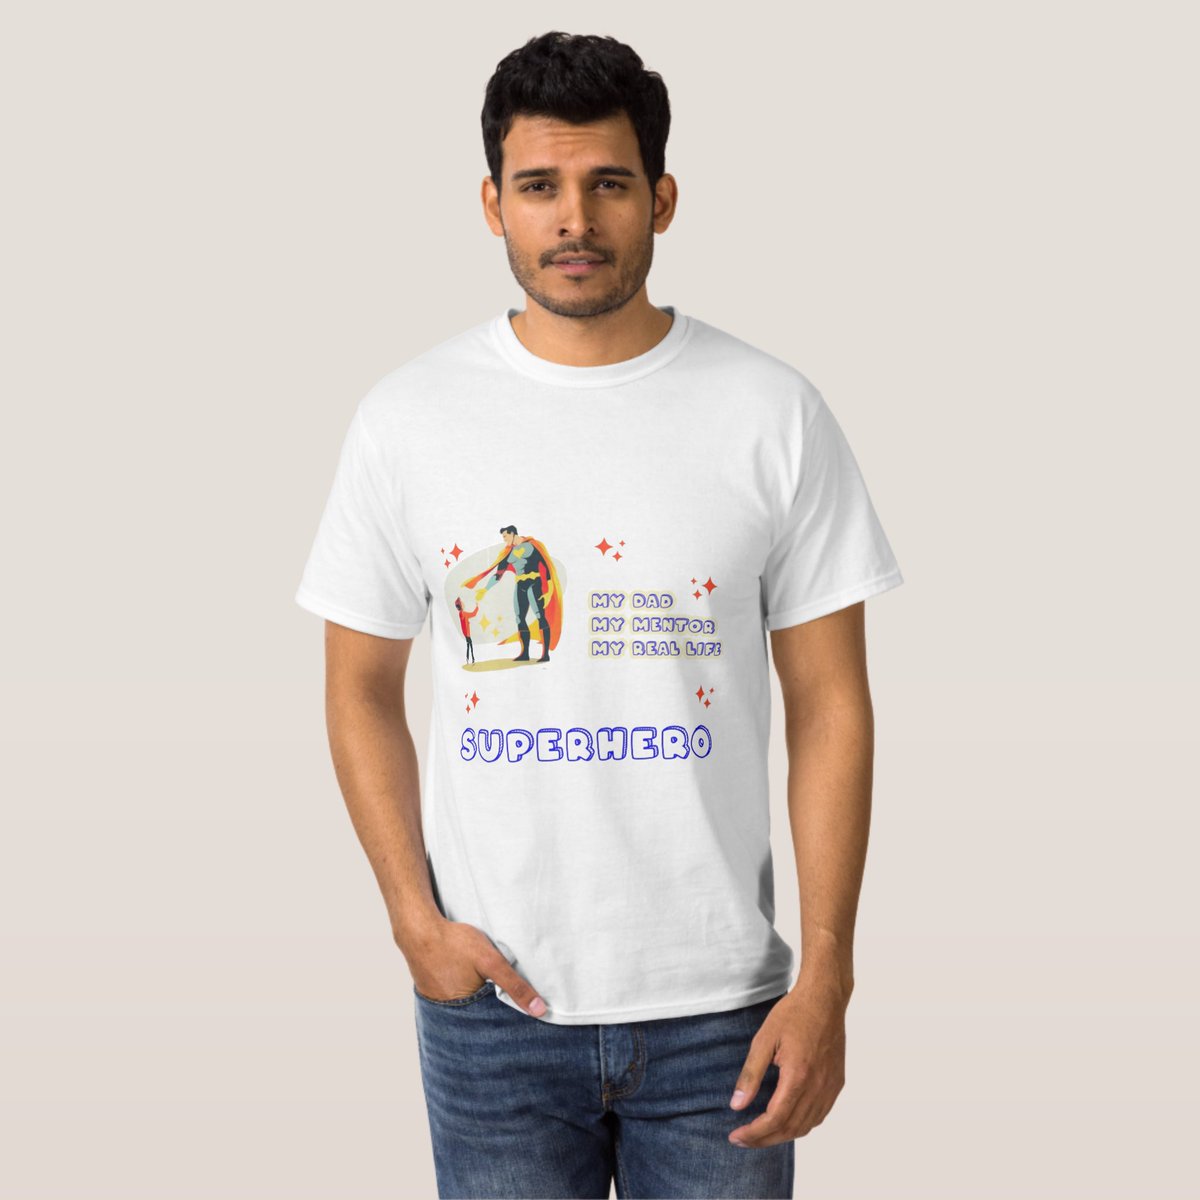 This Father's Day, honor the hero in your life with our 'my real-life superhero' tee! 
#FathersDayGift, #GiftForDad, #DadFashion
#DadStyle, #SuperheroDad, #Fatherhood
#DadLife, #FatherAndSon, #FamilyBonding, 
#GraphicTee
superhero dad T-Shirt zazzle.com/superhero_dad_… via @zazzle